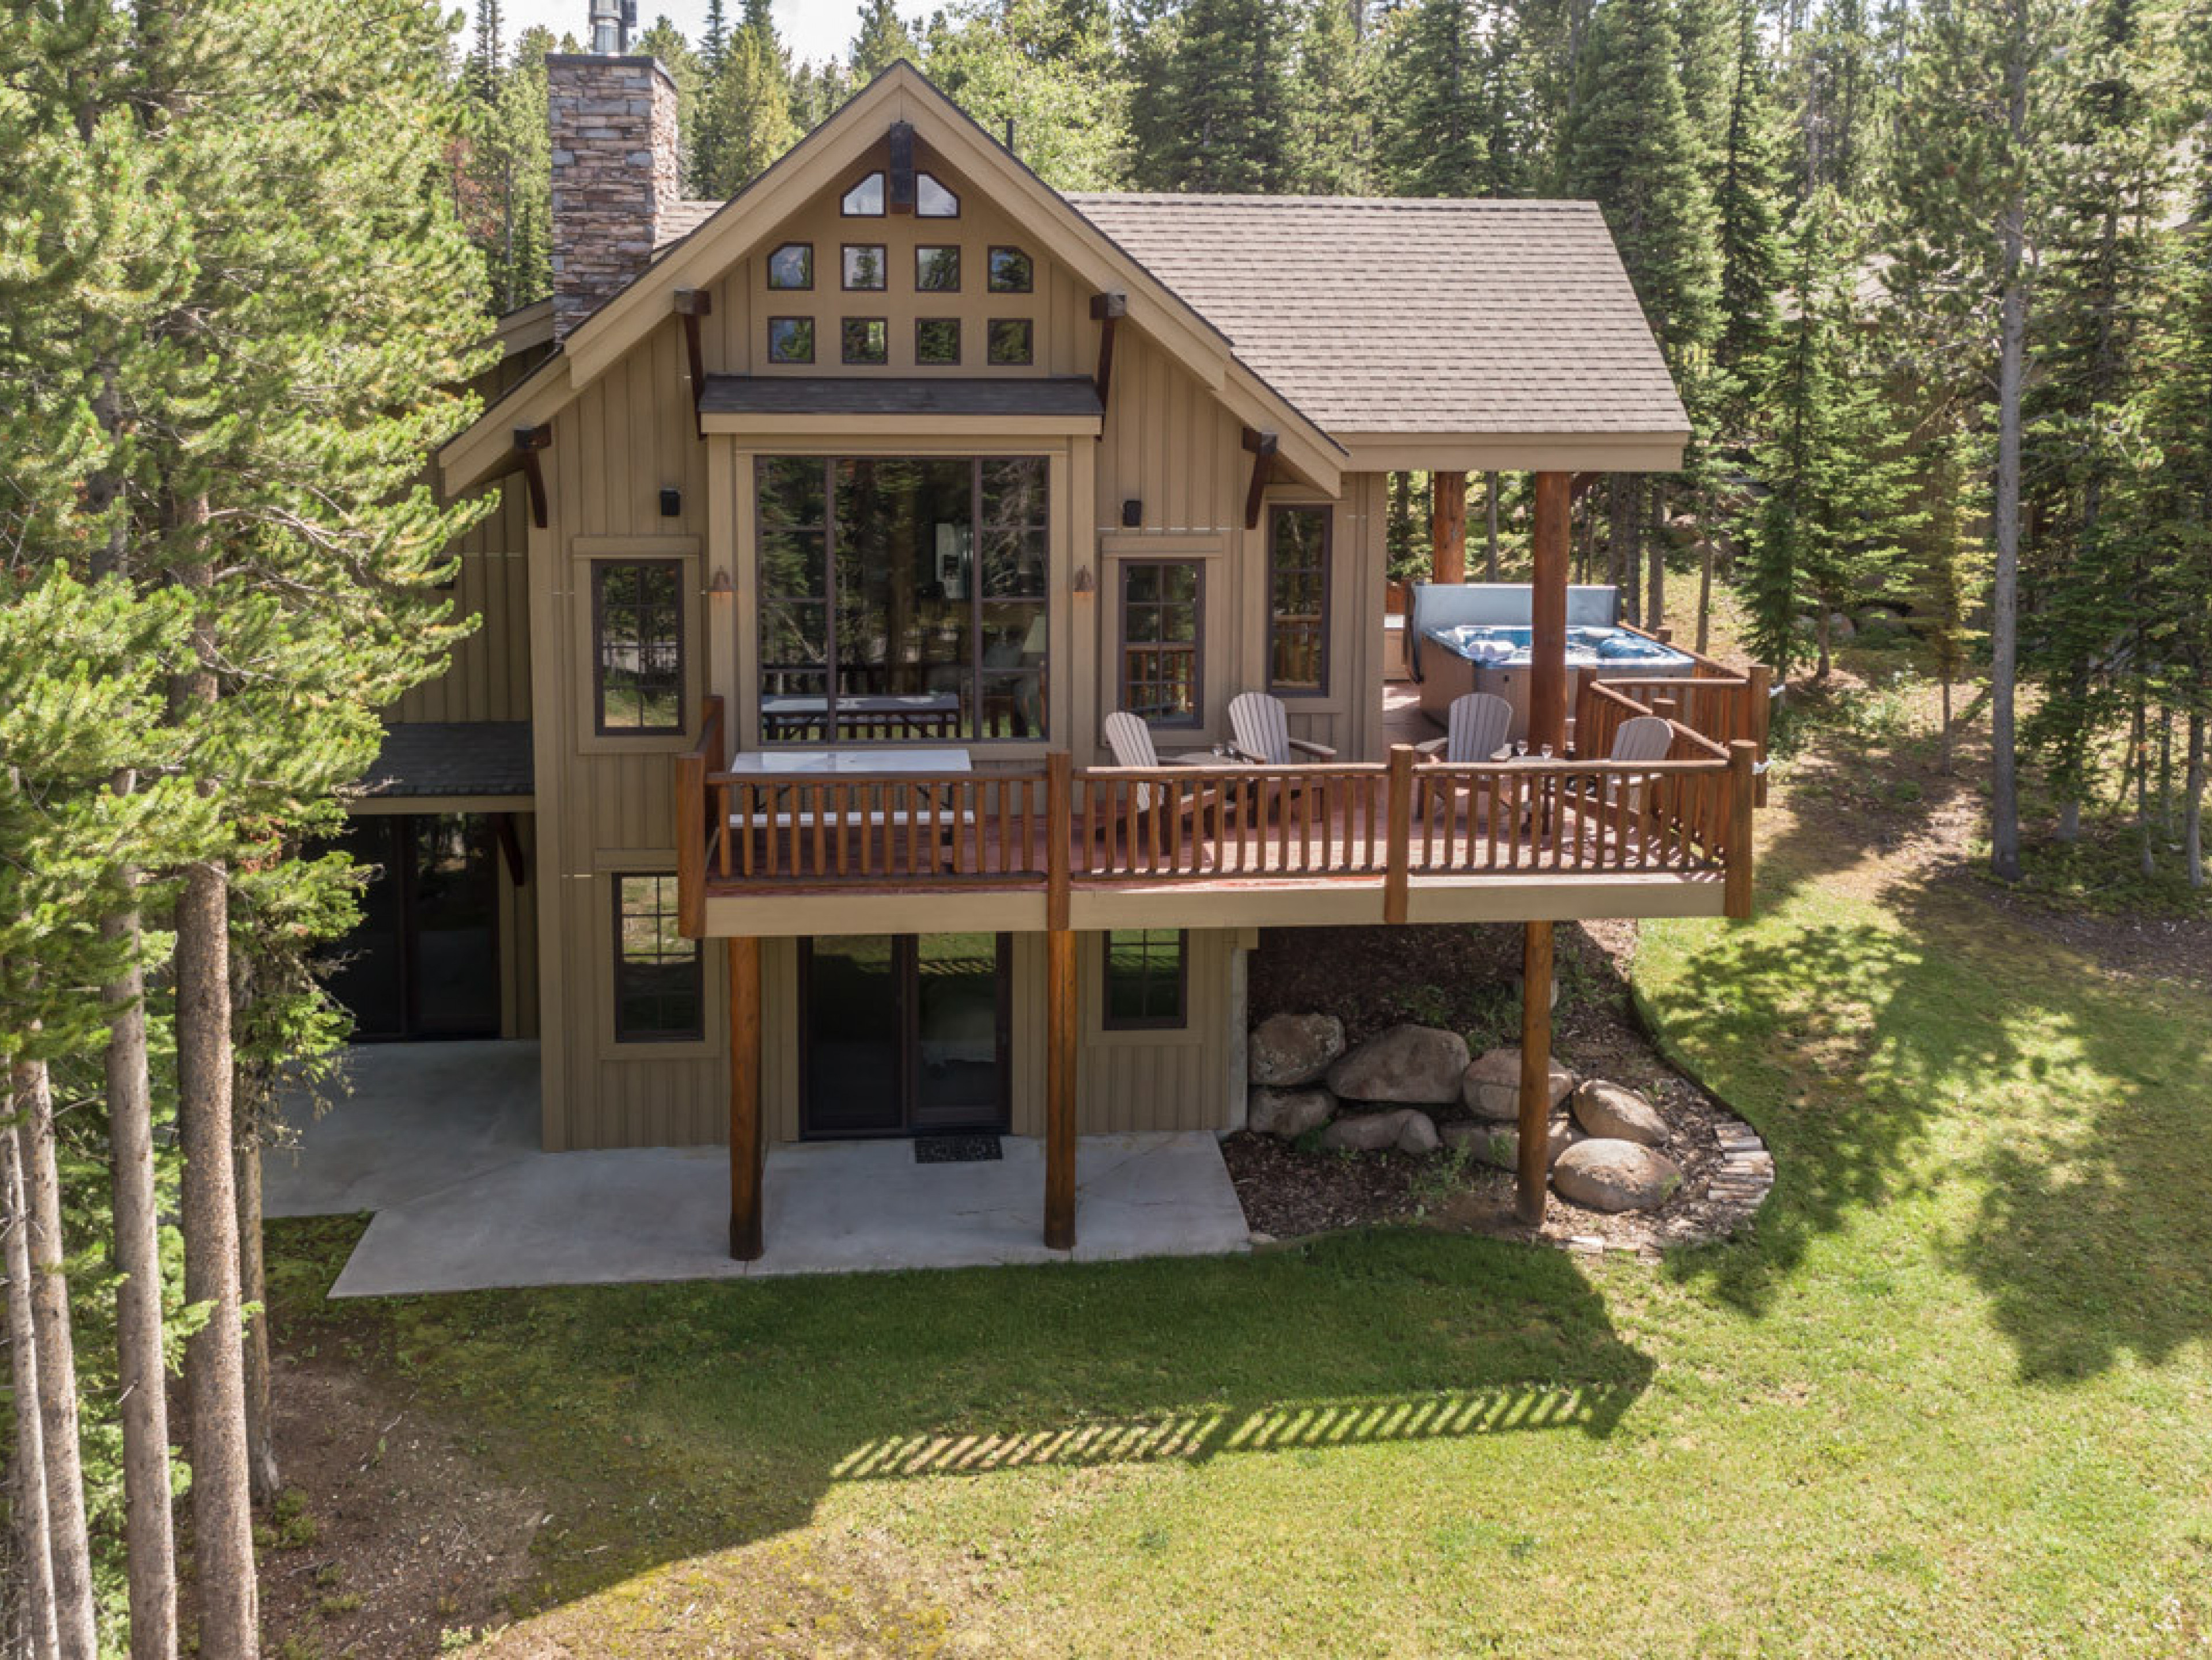 Big Sky 35 Yellowstone vacation rentals with hot tubs 